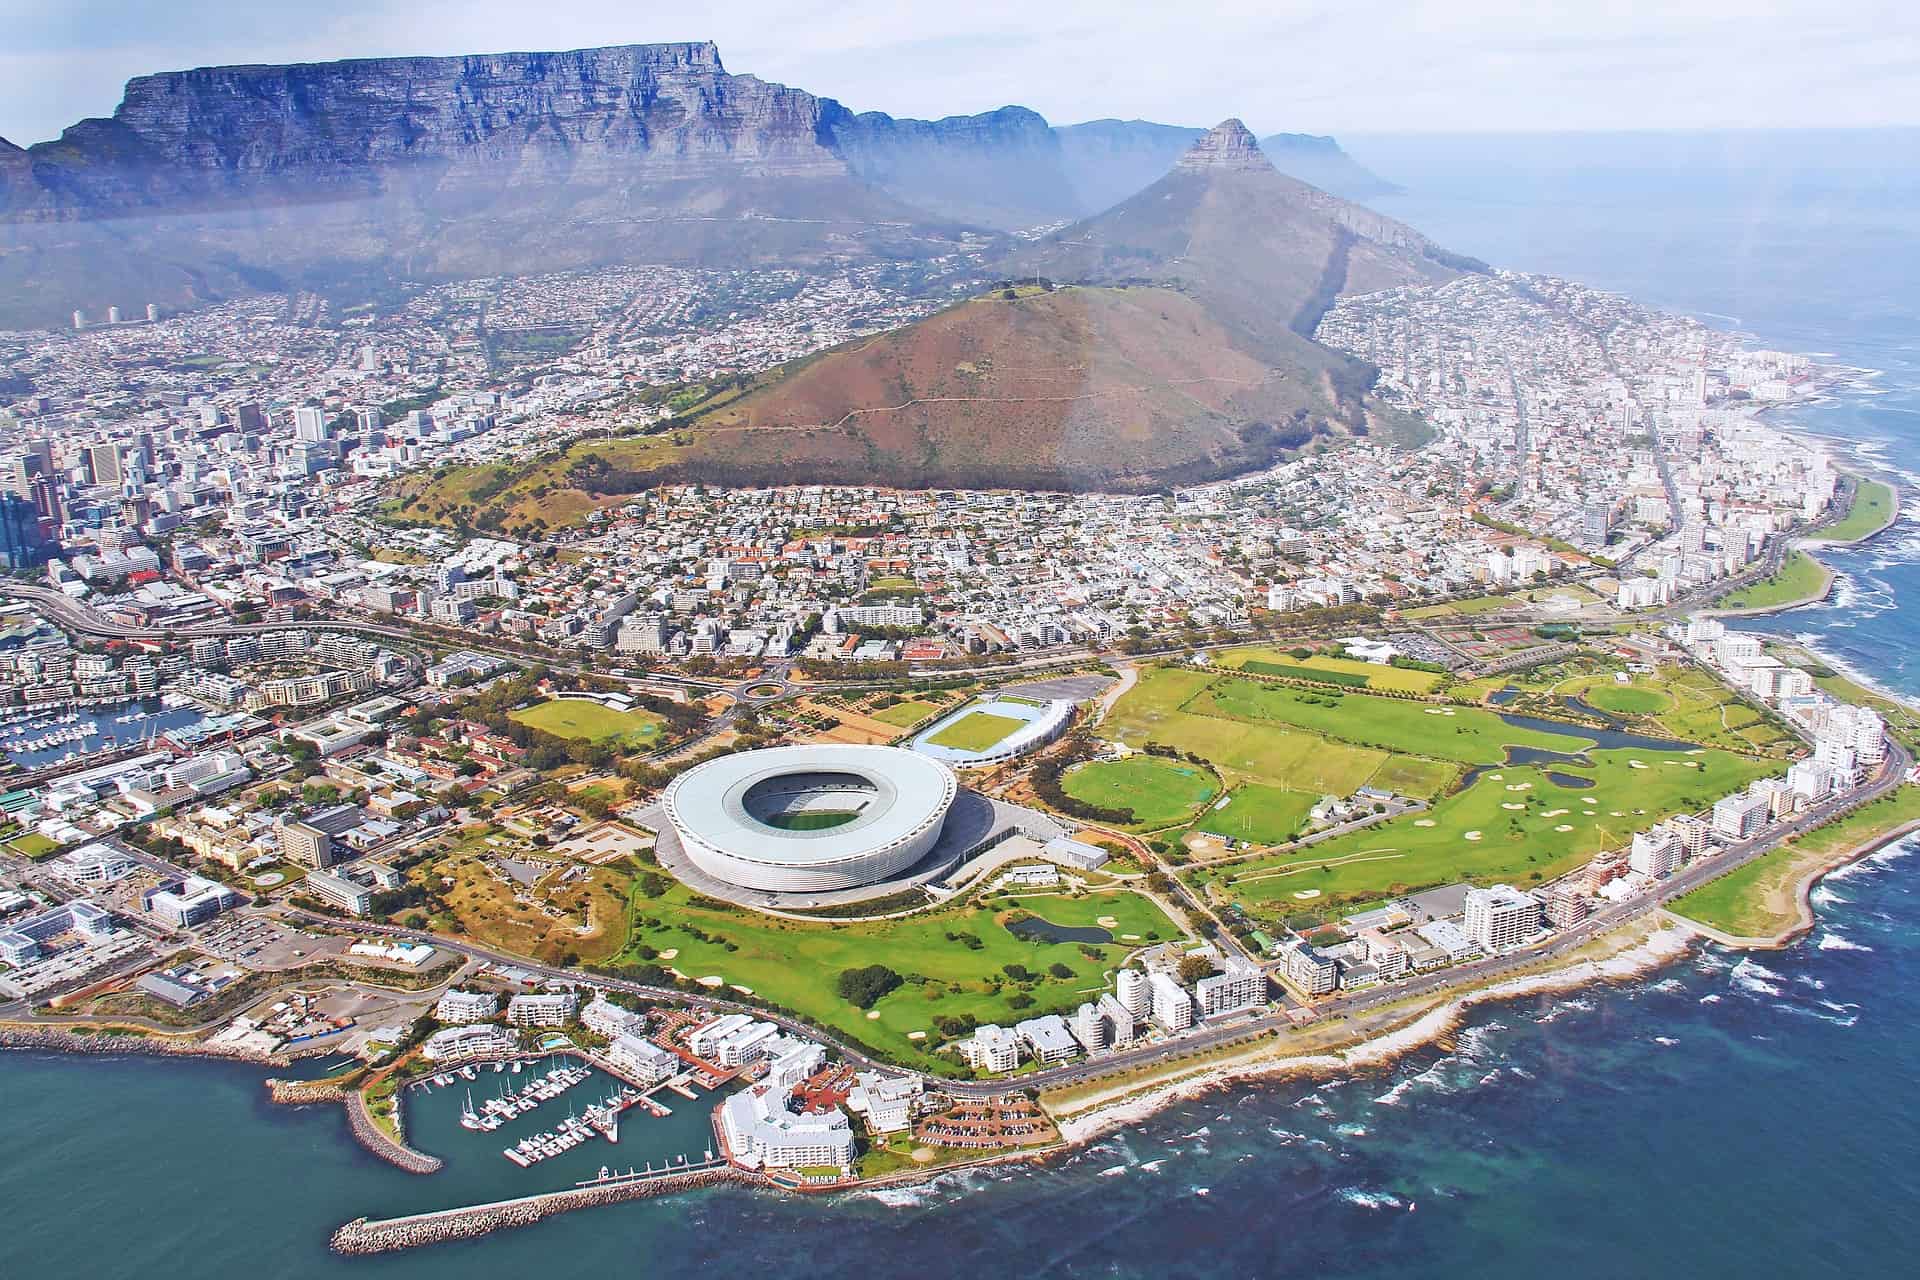 Best things to do in Cape Town South Africa David Frost view from helicopter courtesy of Sharon Ang on